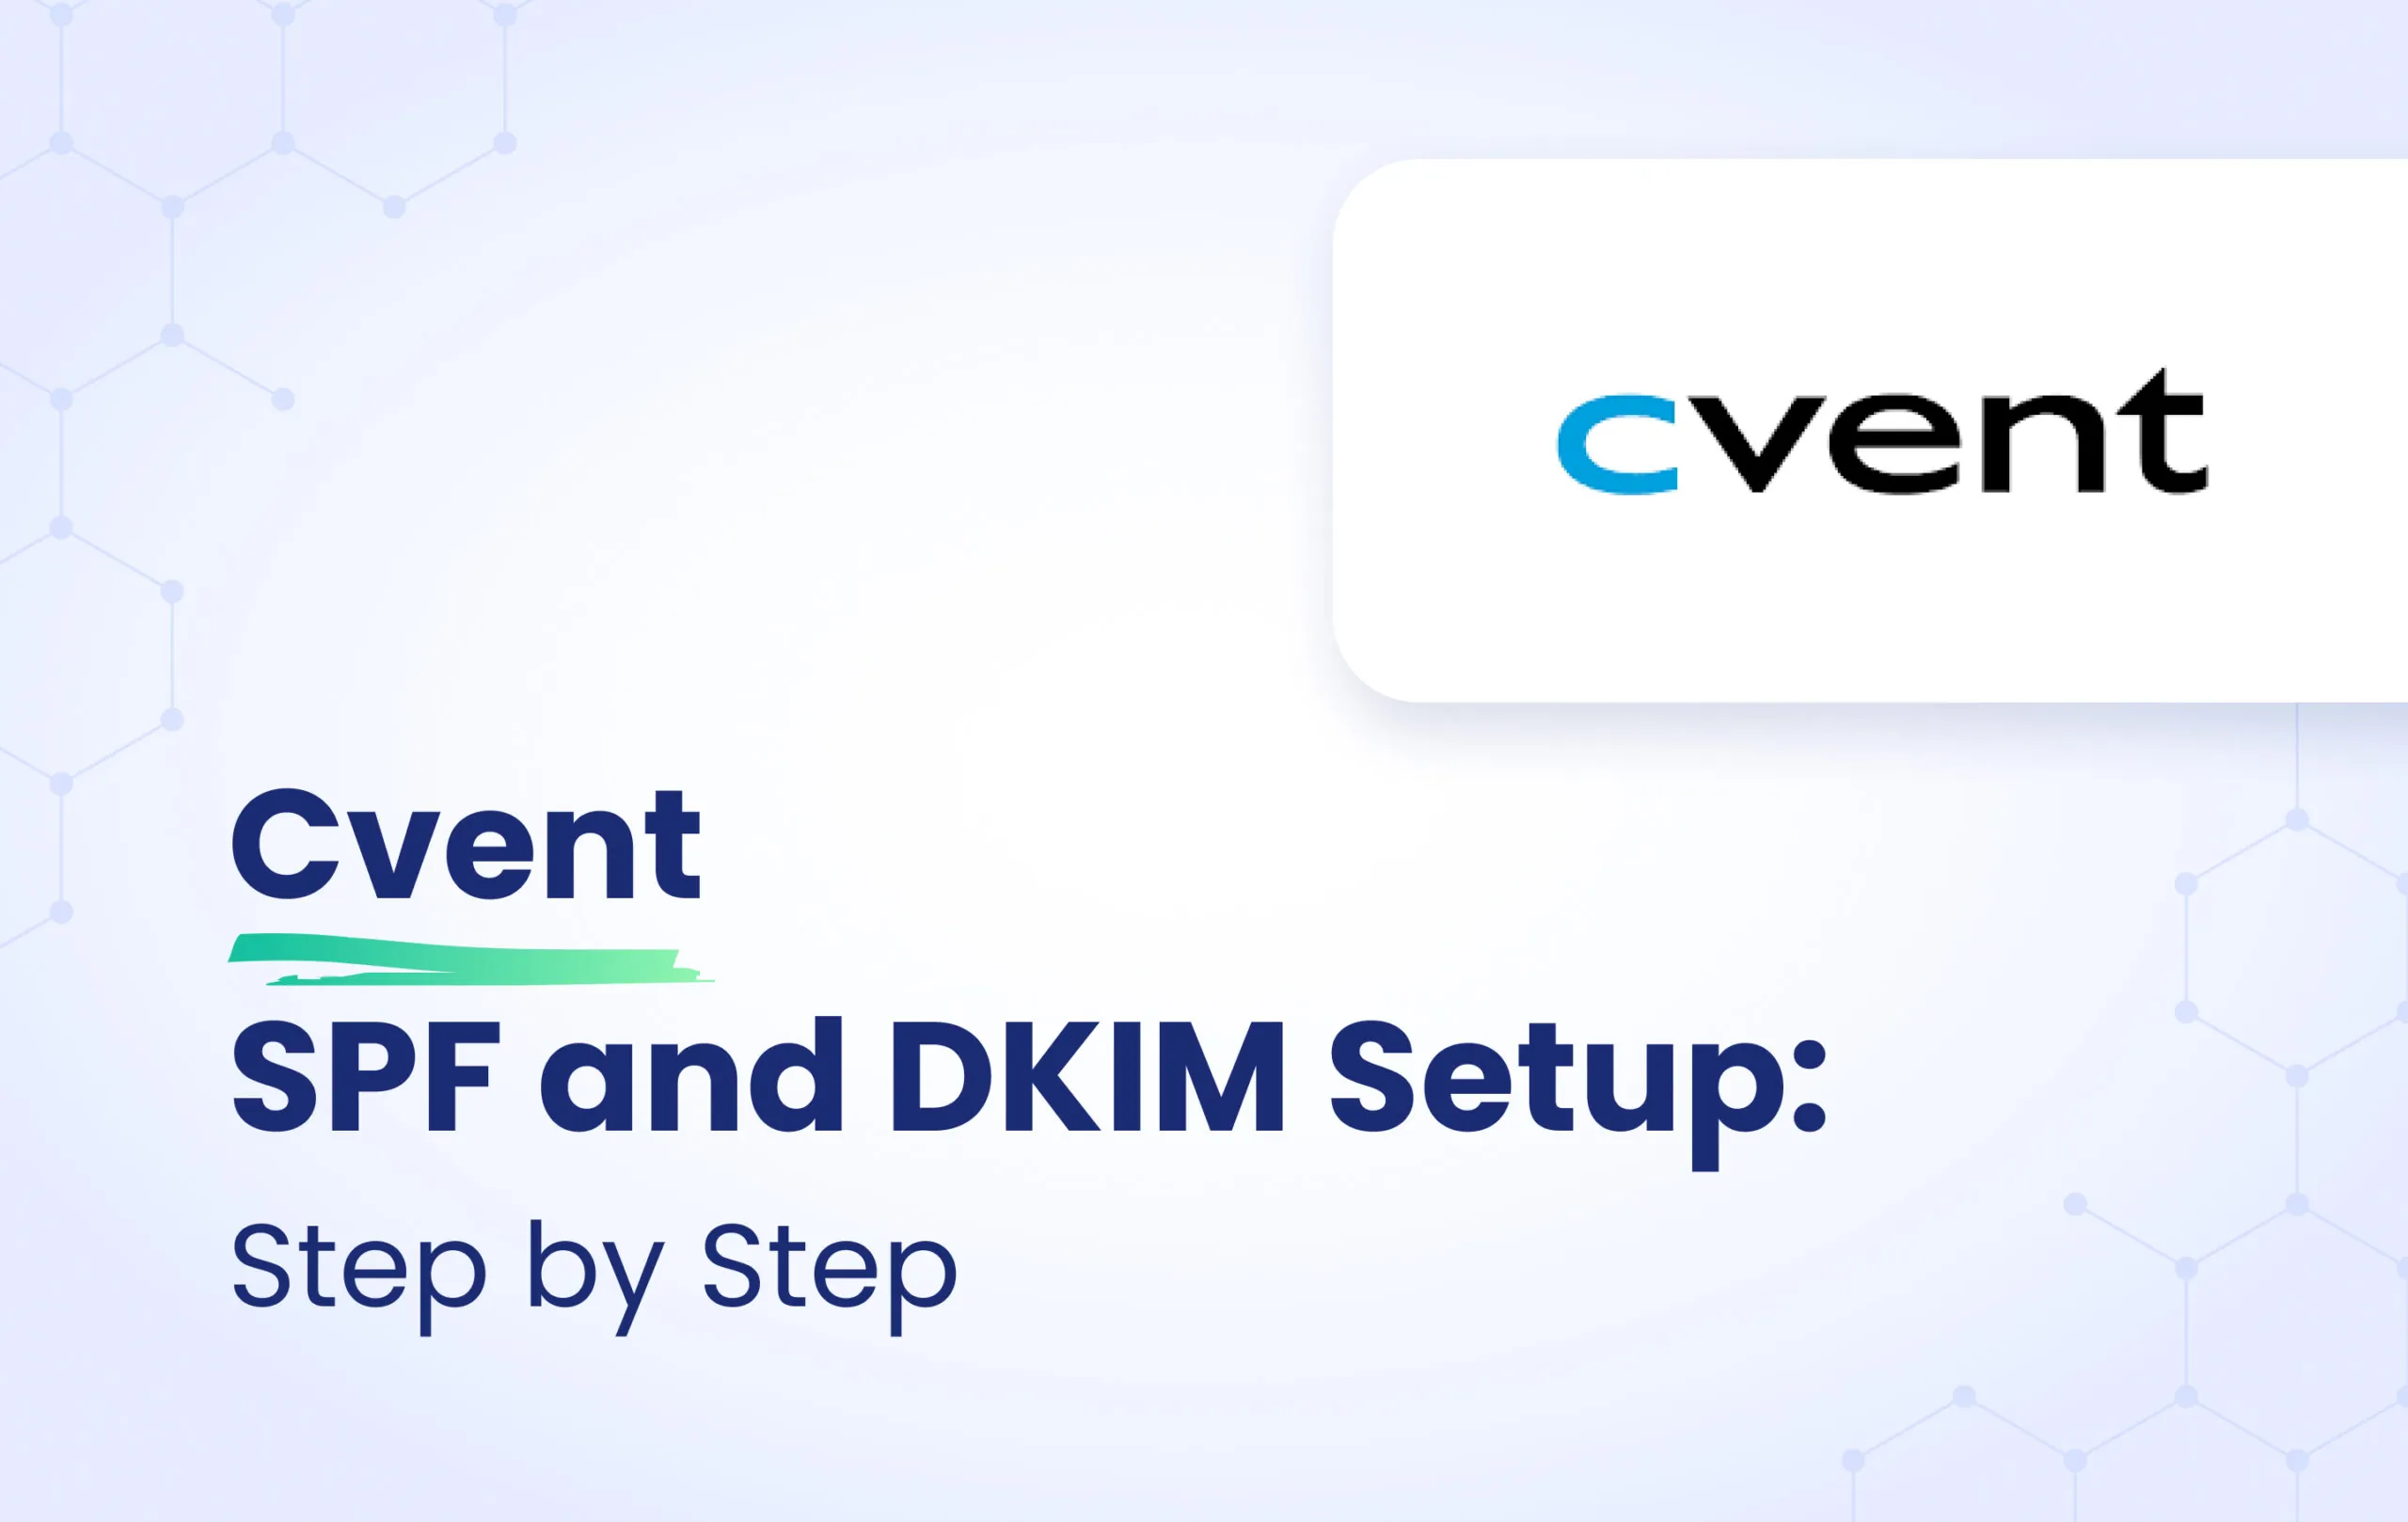 Cvent SPF and DKIM Configuration: Step-by-Step featured image